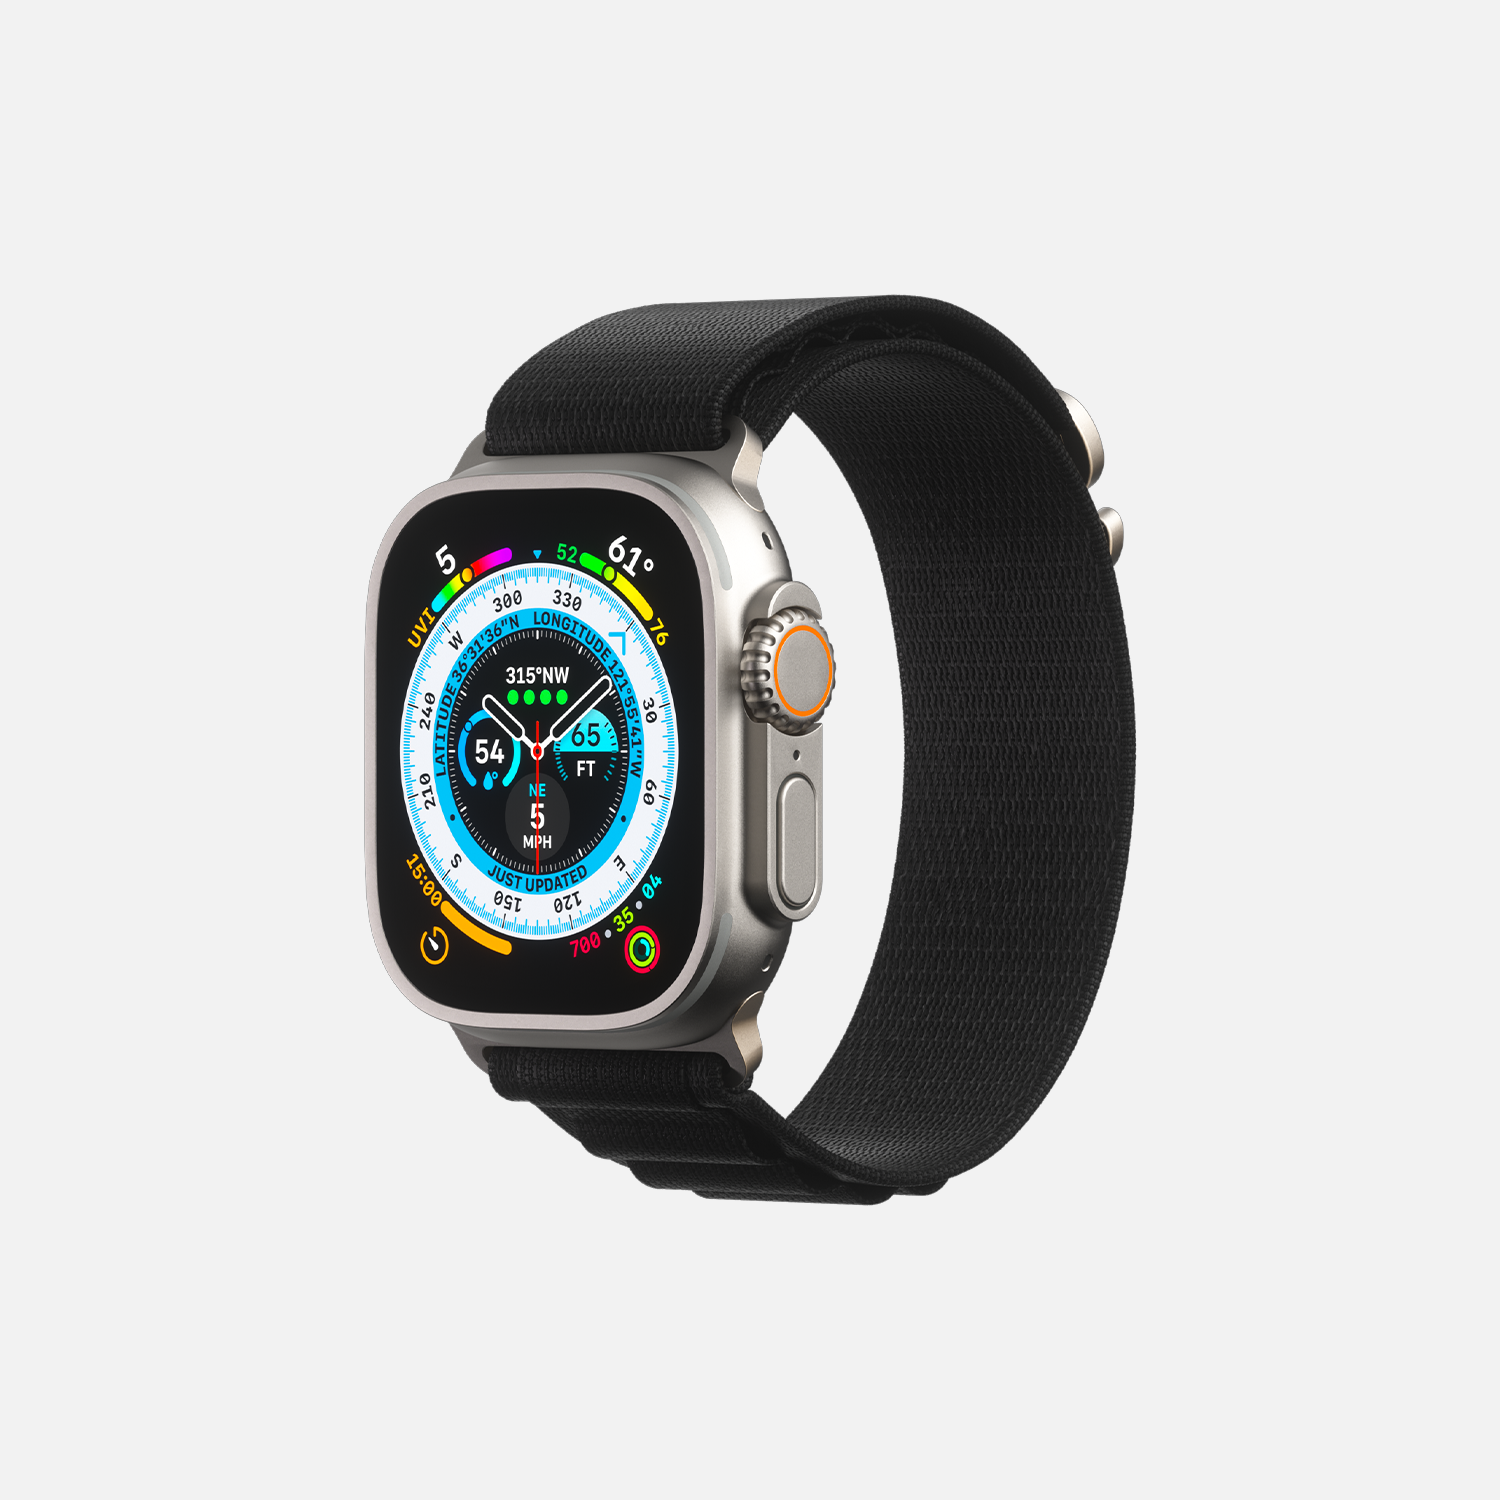 Modern smartwatch with colorful display and black sport band on a white background.